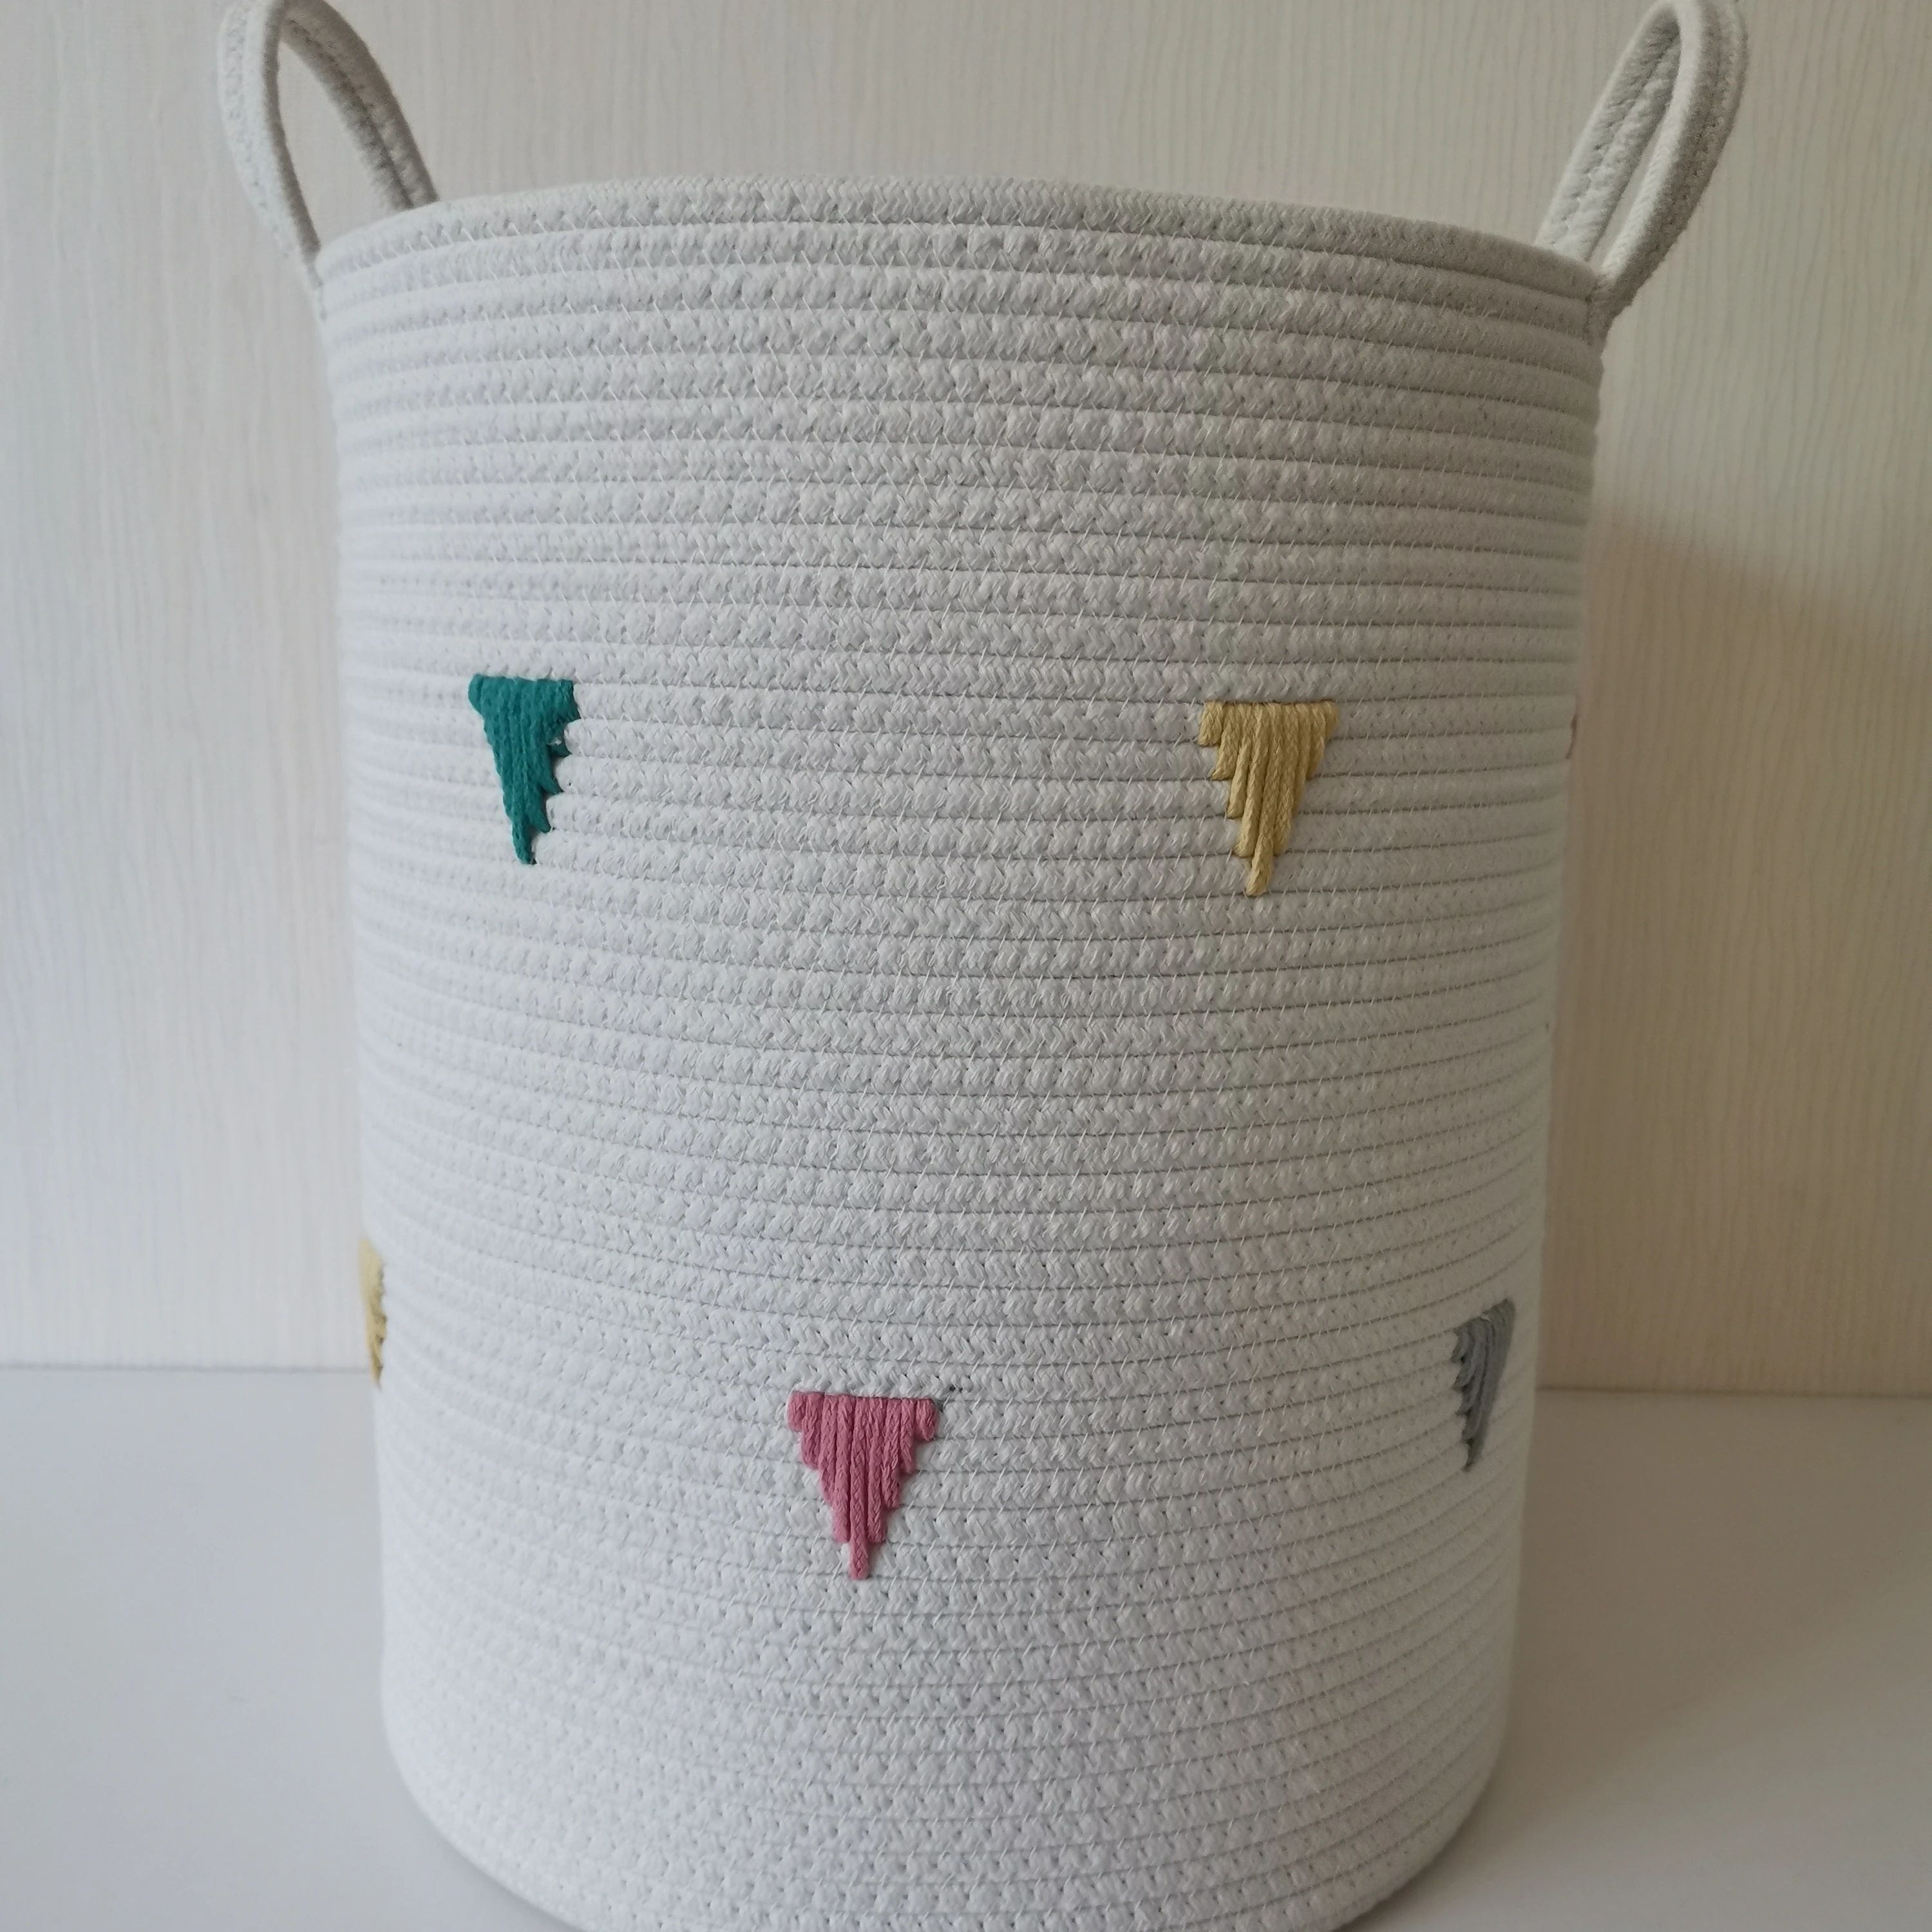 

Extra Large Cotton Rope Basket 13.8"x17.7", Woven Baskets for Storing Blankets, Towels, Toys, Diaper. mats,round basket, Customized color